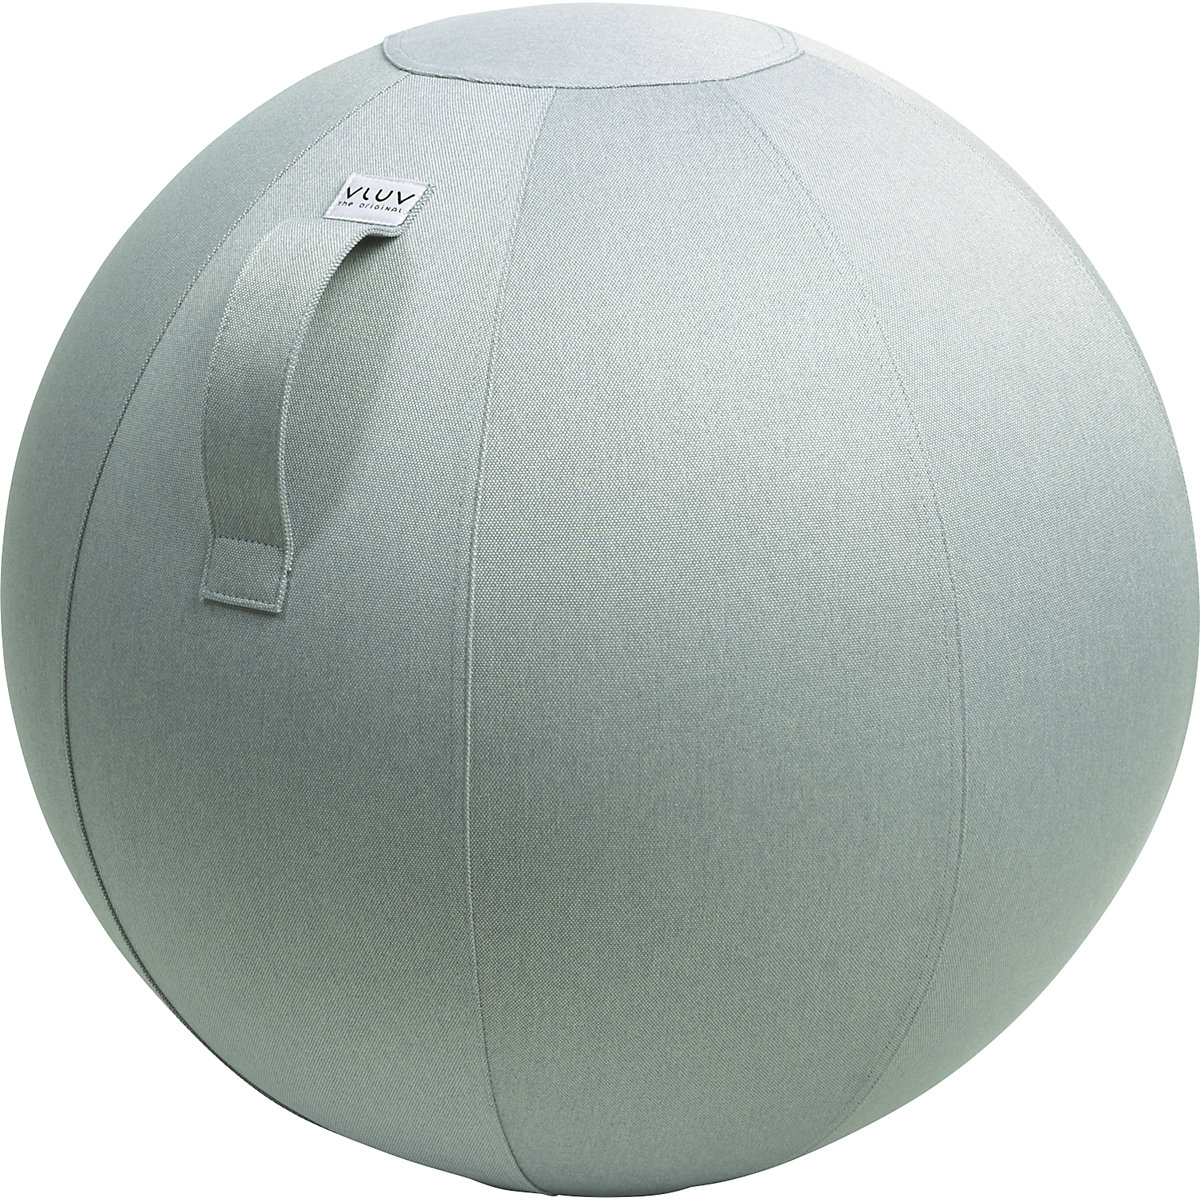 LEIV Swiss ball – VLUV, fabric cover with the appearance of canvas, 600 – 650 mm, silver grey